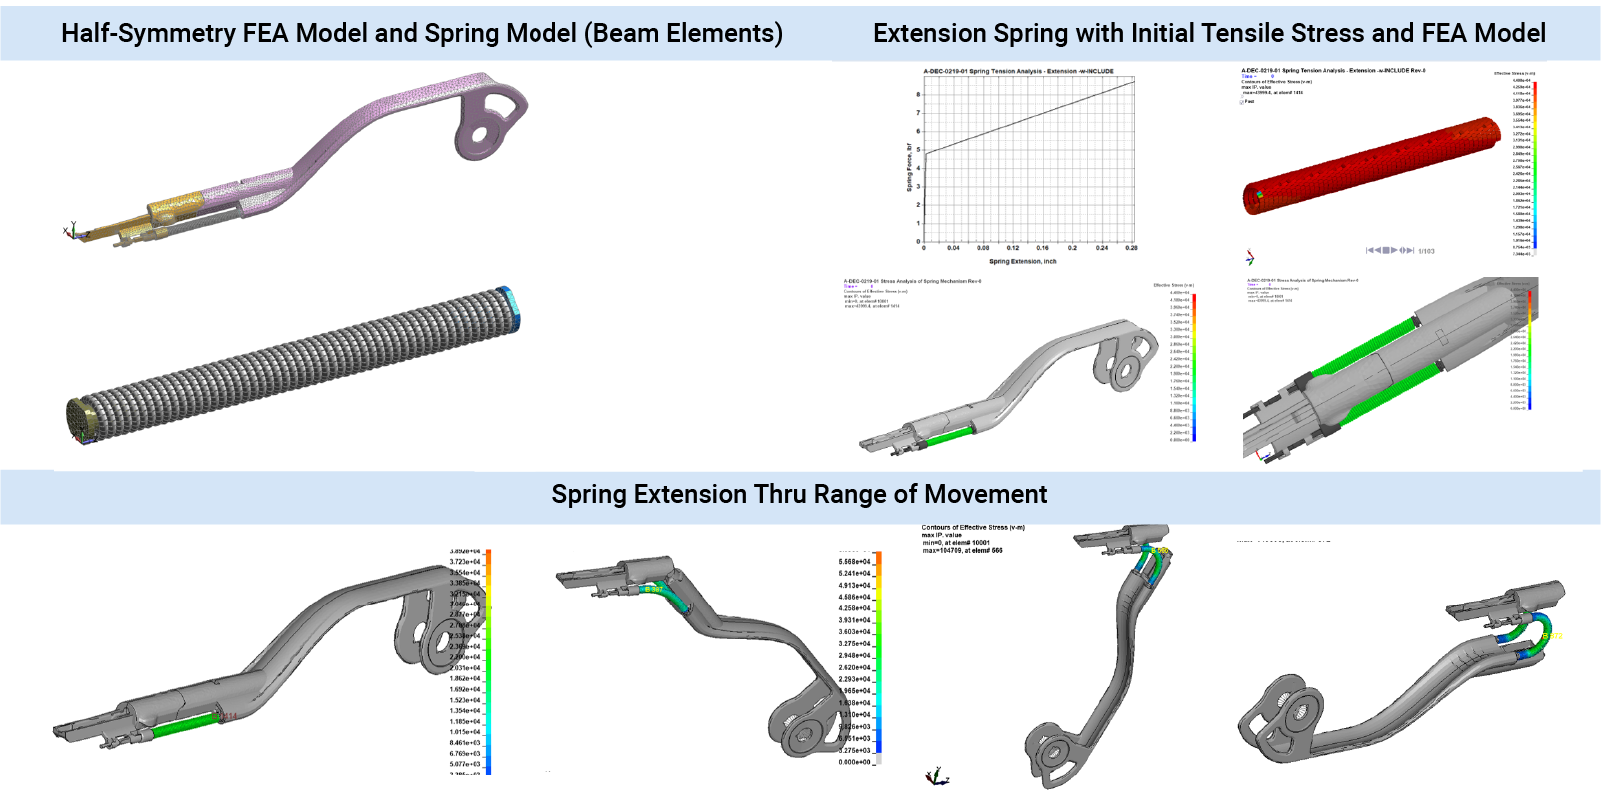  Extension Spring Fatigue Analysis from Preload to Full-Extension (Implicit, Nonlinear FEA Simulation)